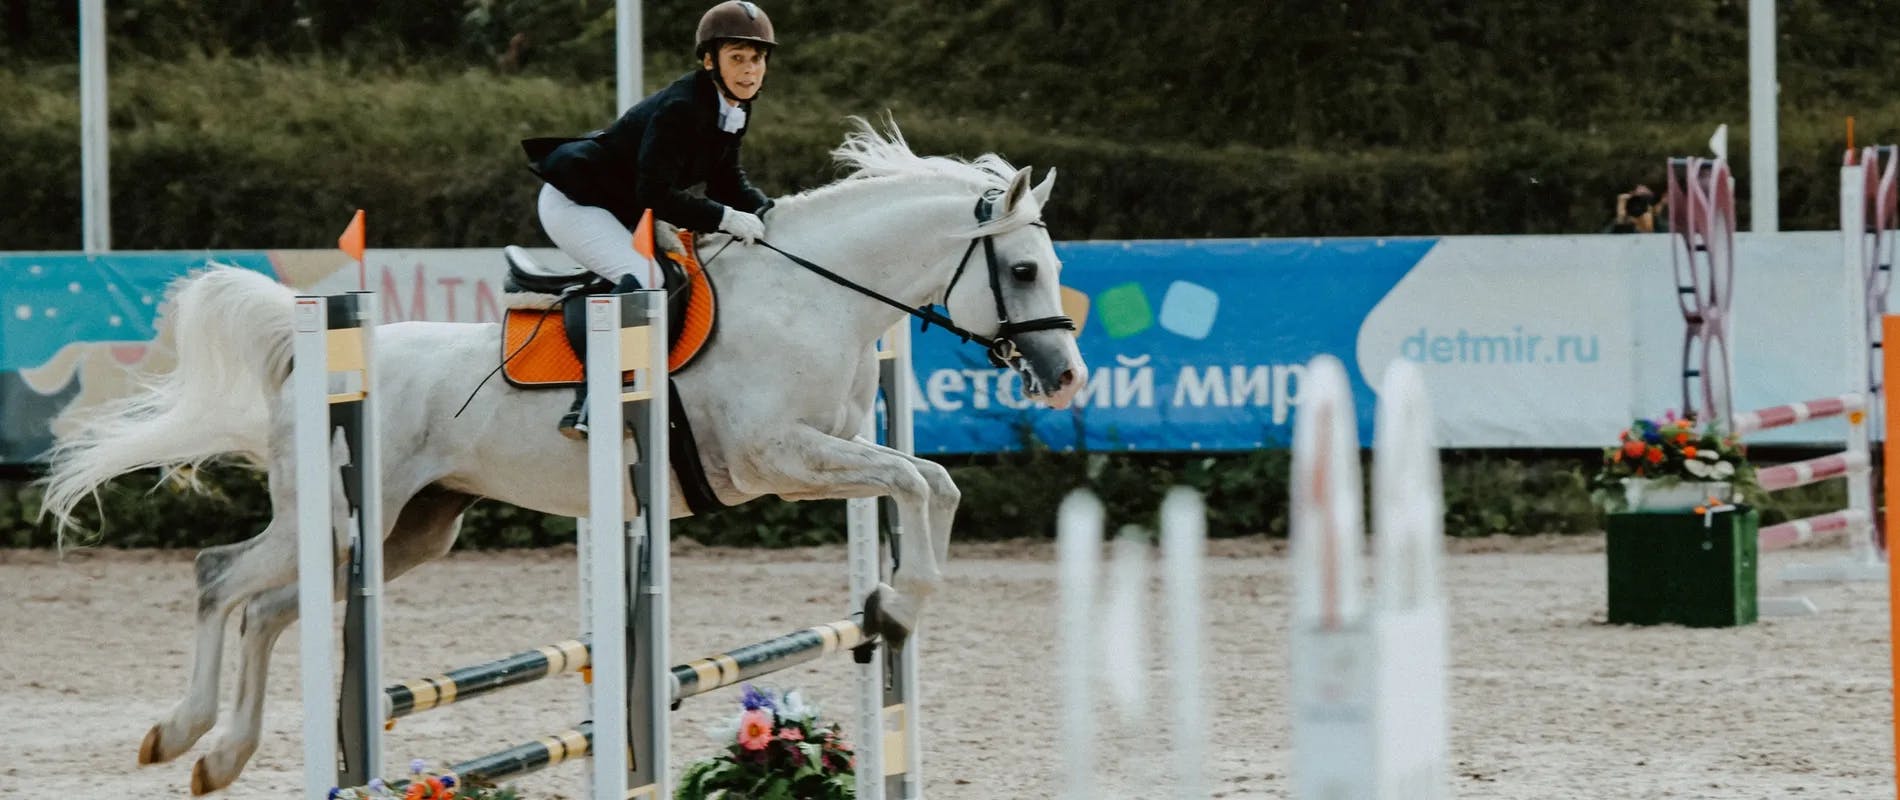 Grey horse jumping a relatively small jump in a sand ring